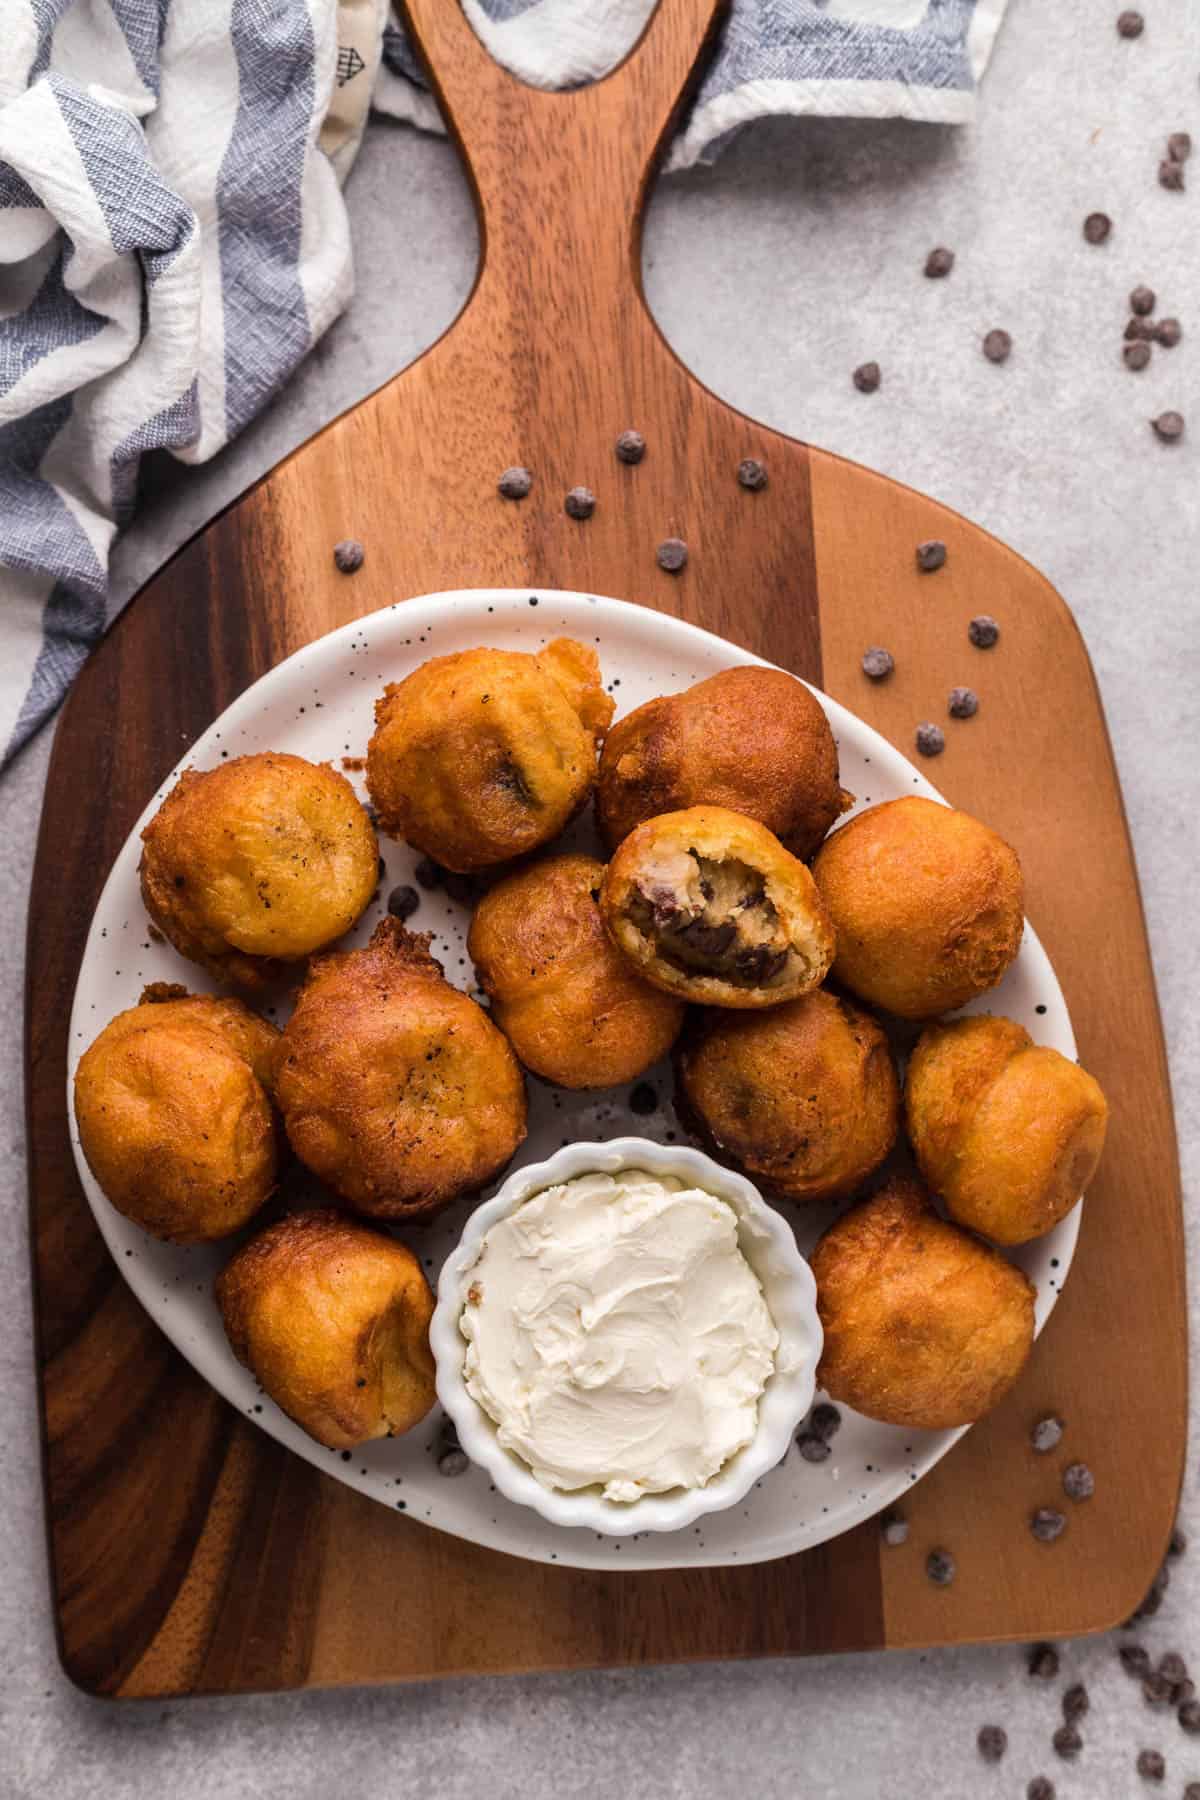 Fried cookie dough bites on a plate set on a wooden cutting board.